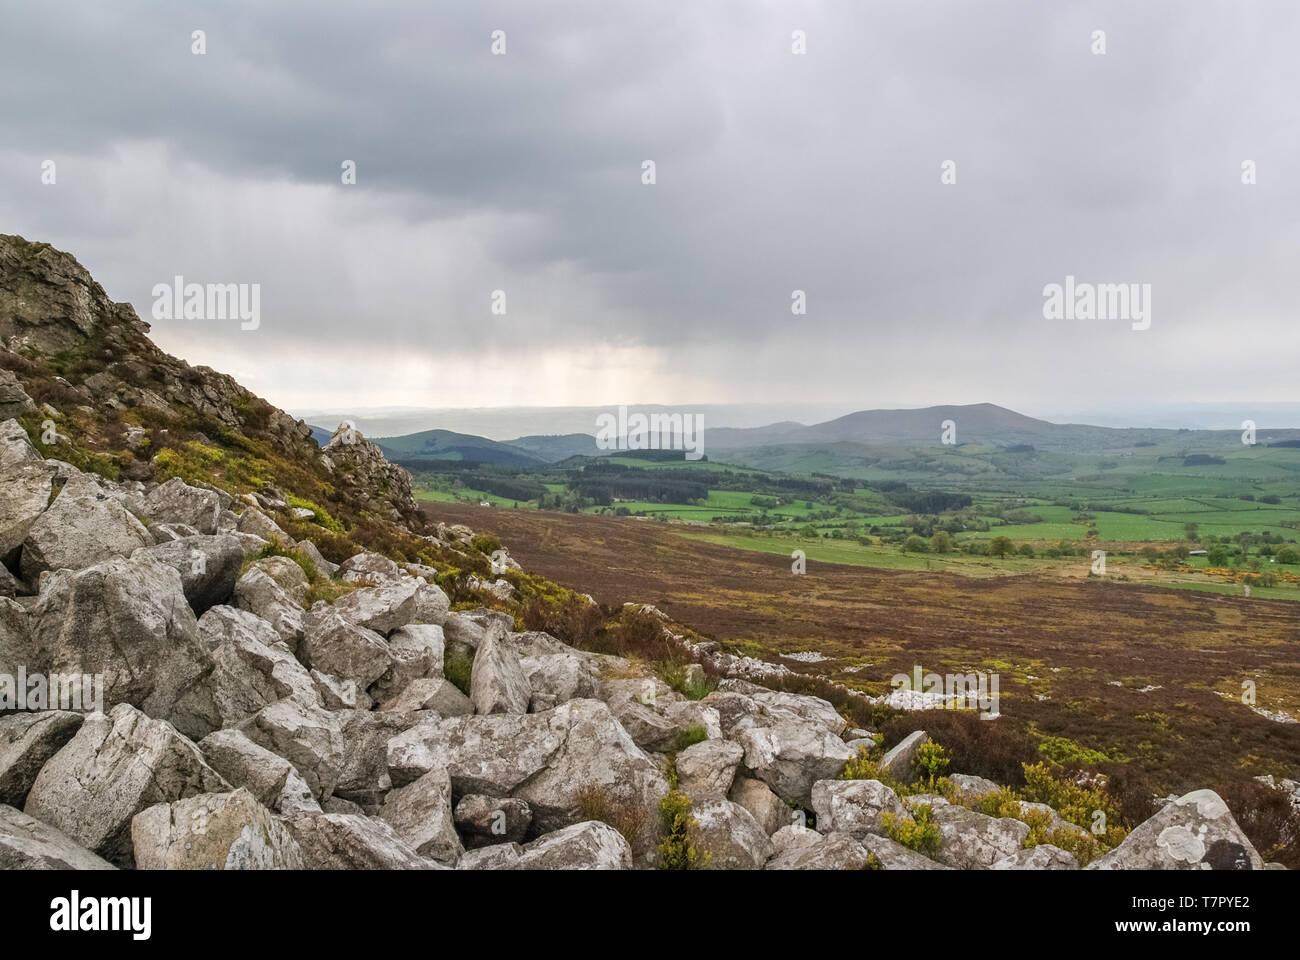 A view of tumbled rocks and stormy skies over distant landscape at Stiperstones Nature Reserve, Shropshire, UK Stock Photo